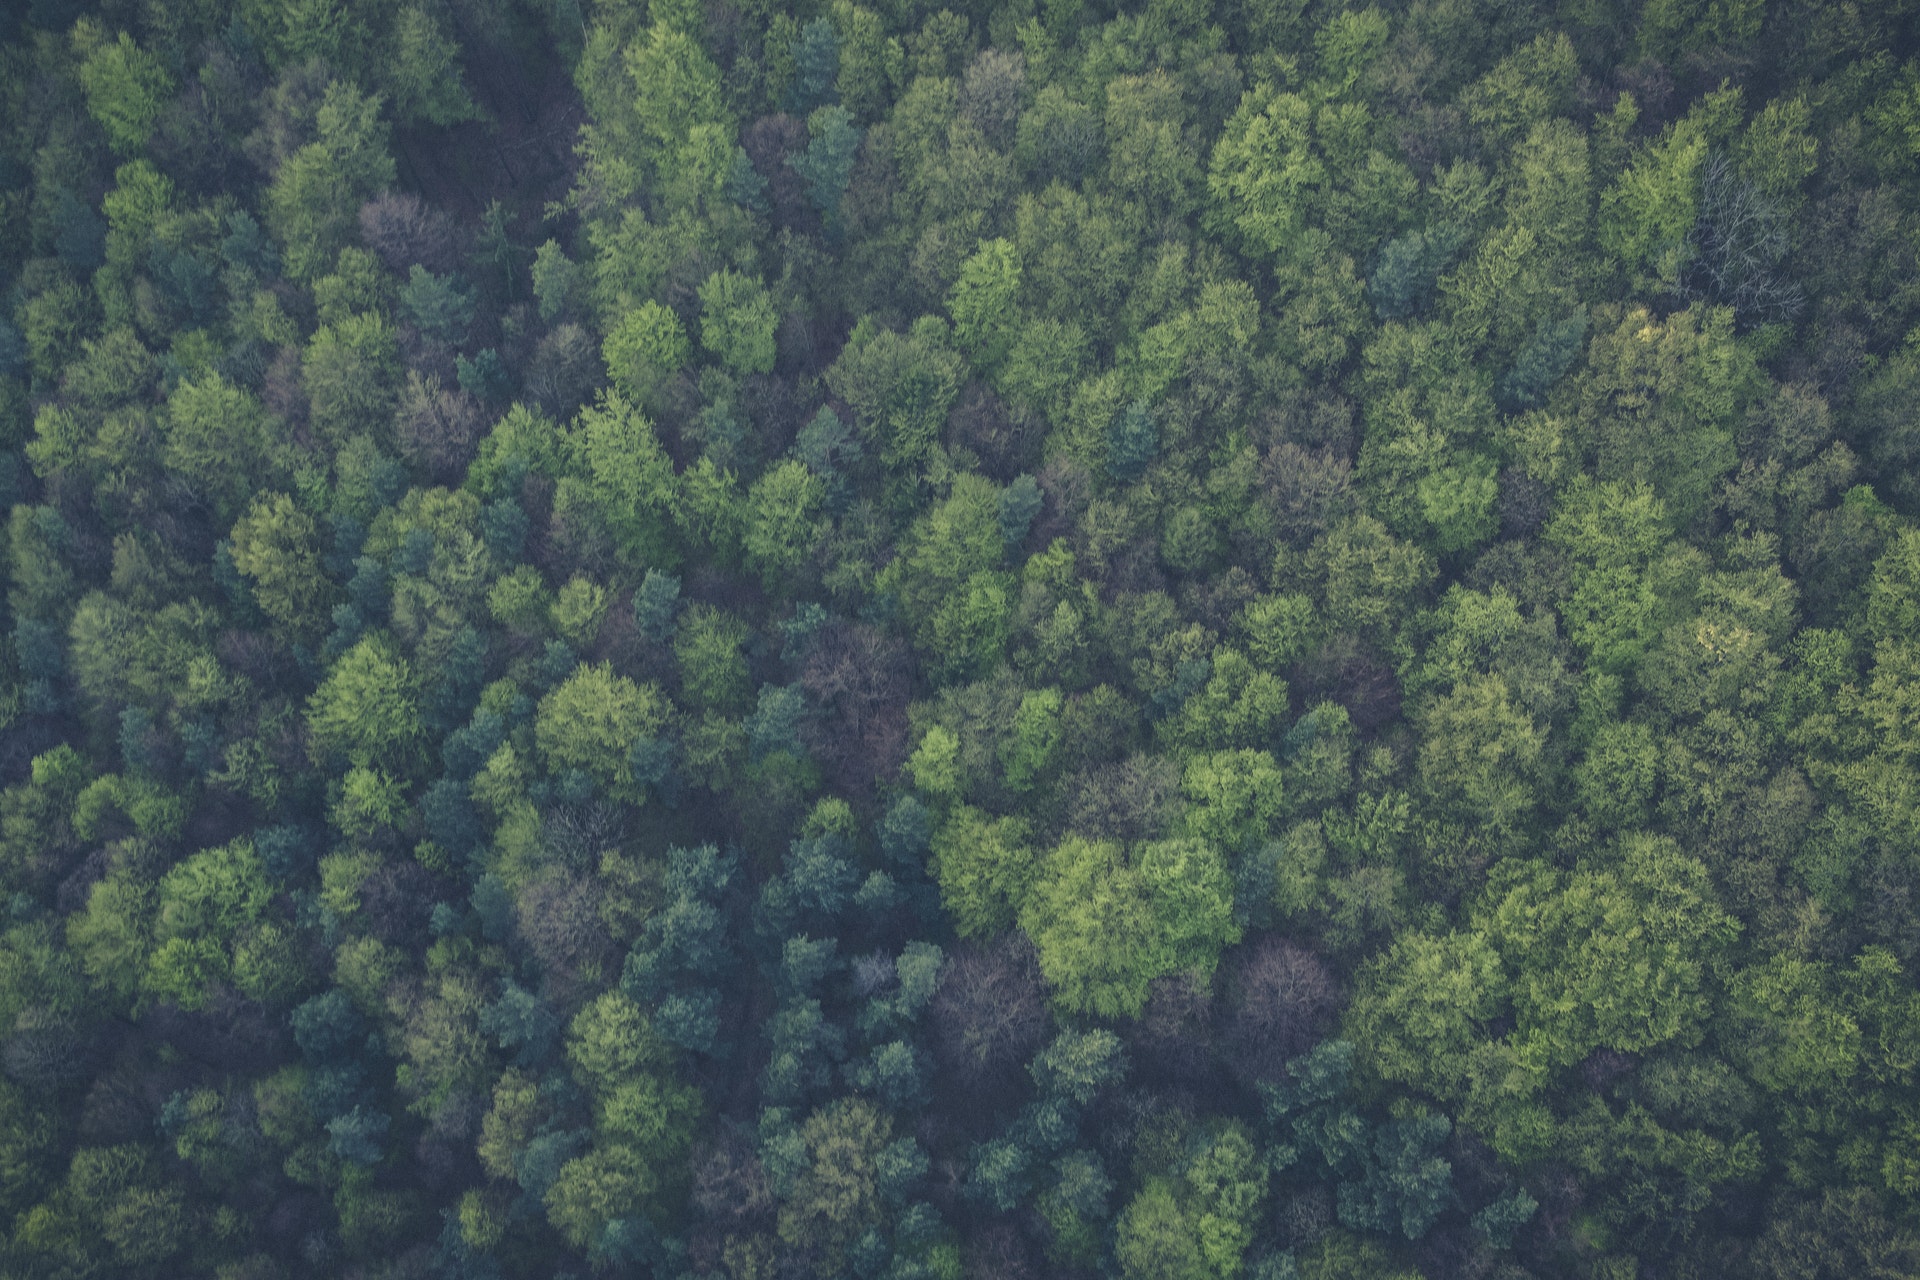 bird-s-eye-view-nature-forest-trees-113338